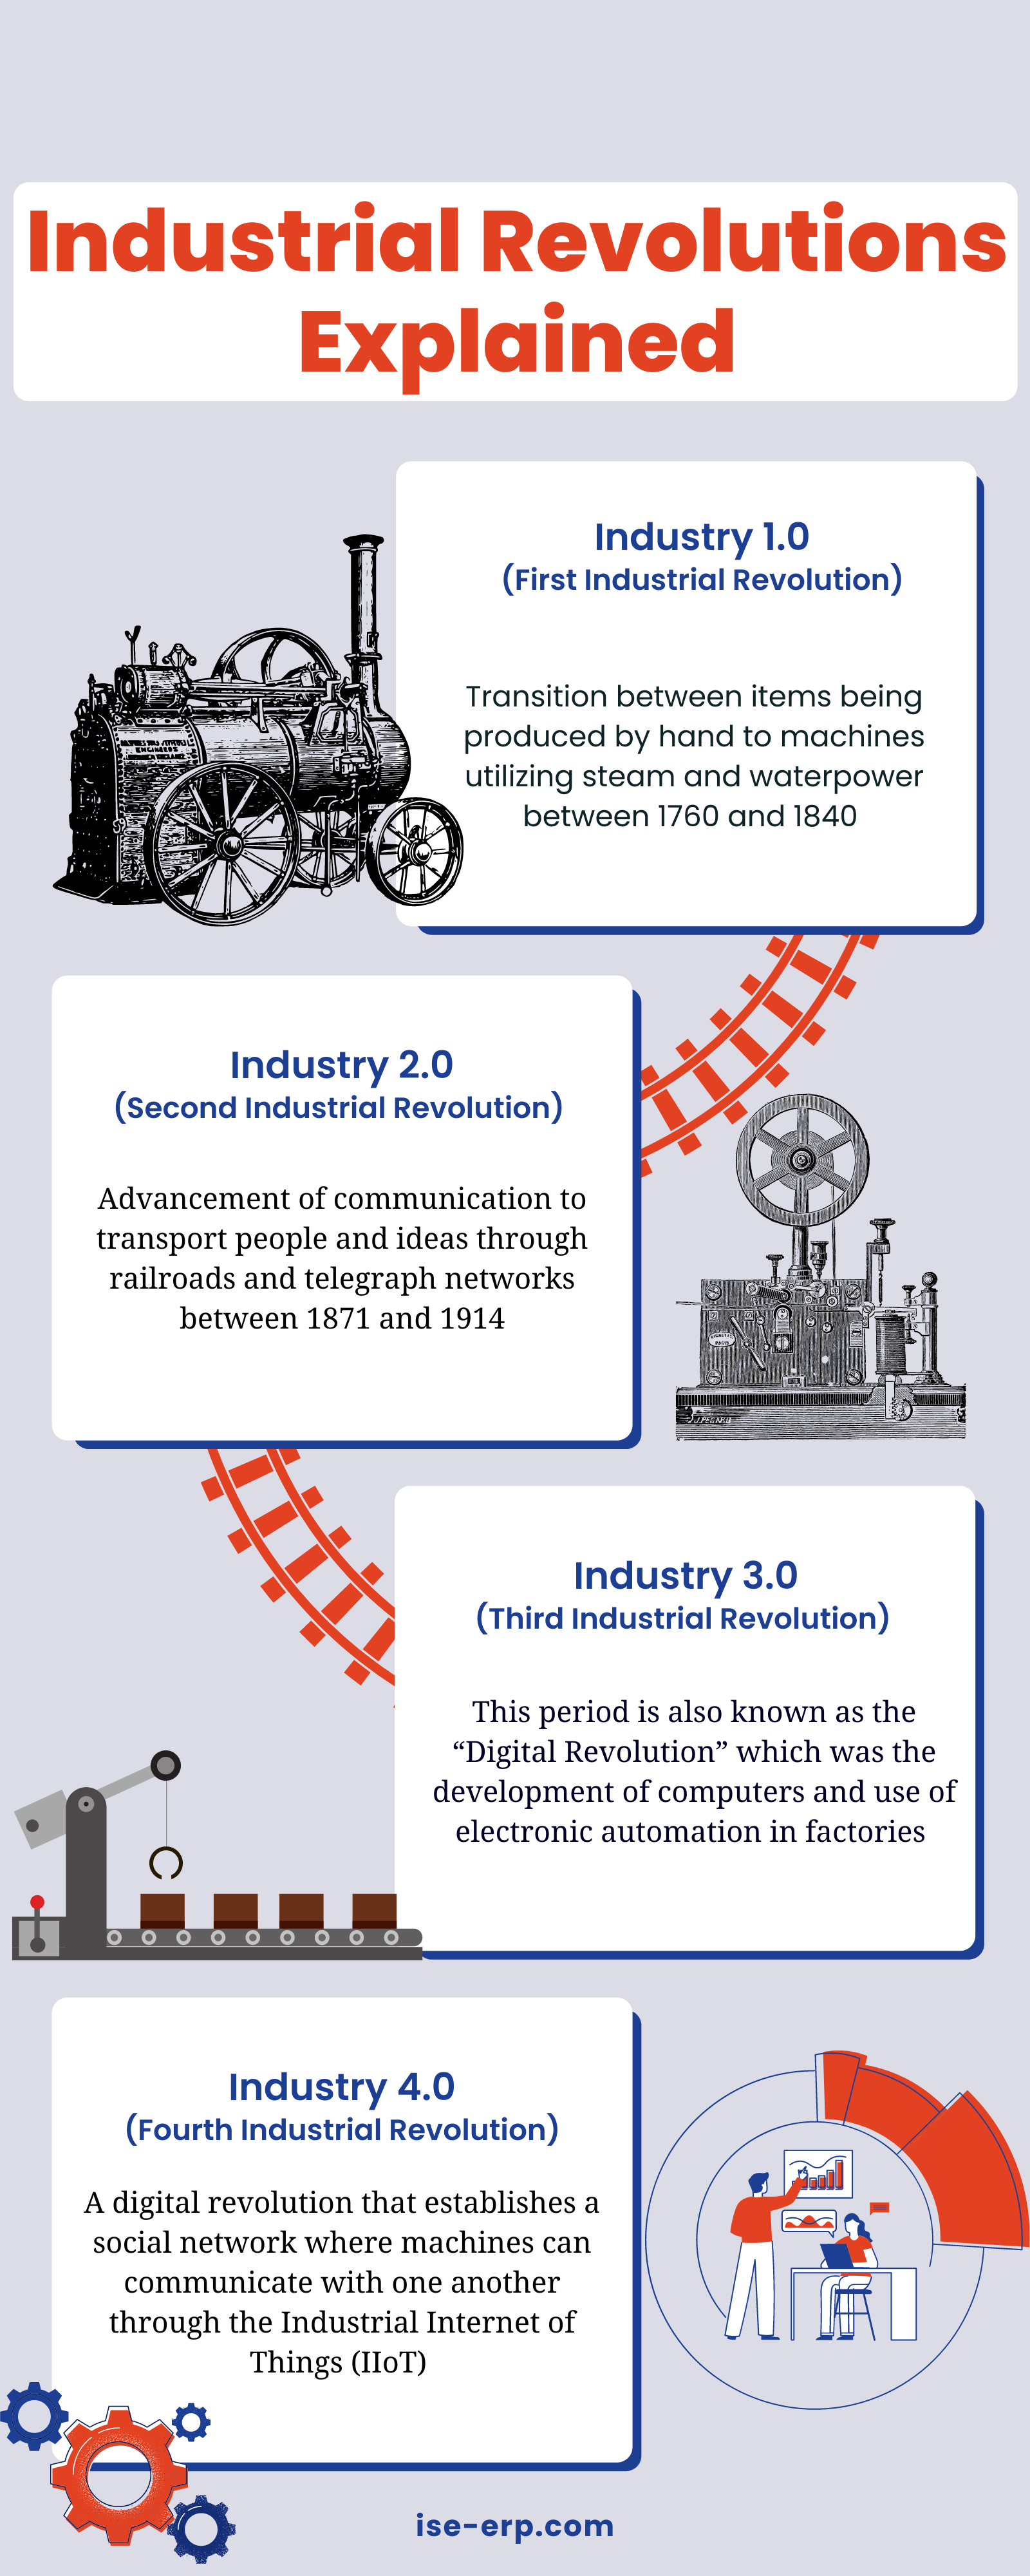 Industrial Revolutions Infographic (1)